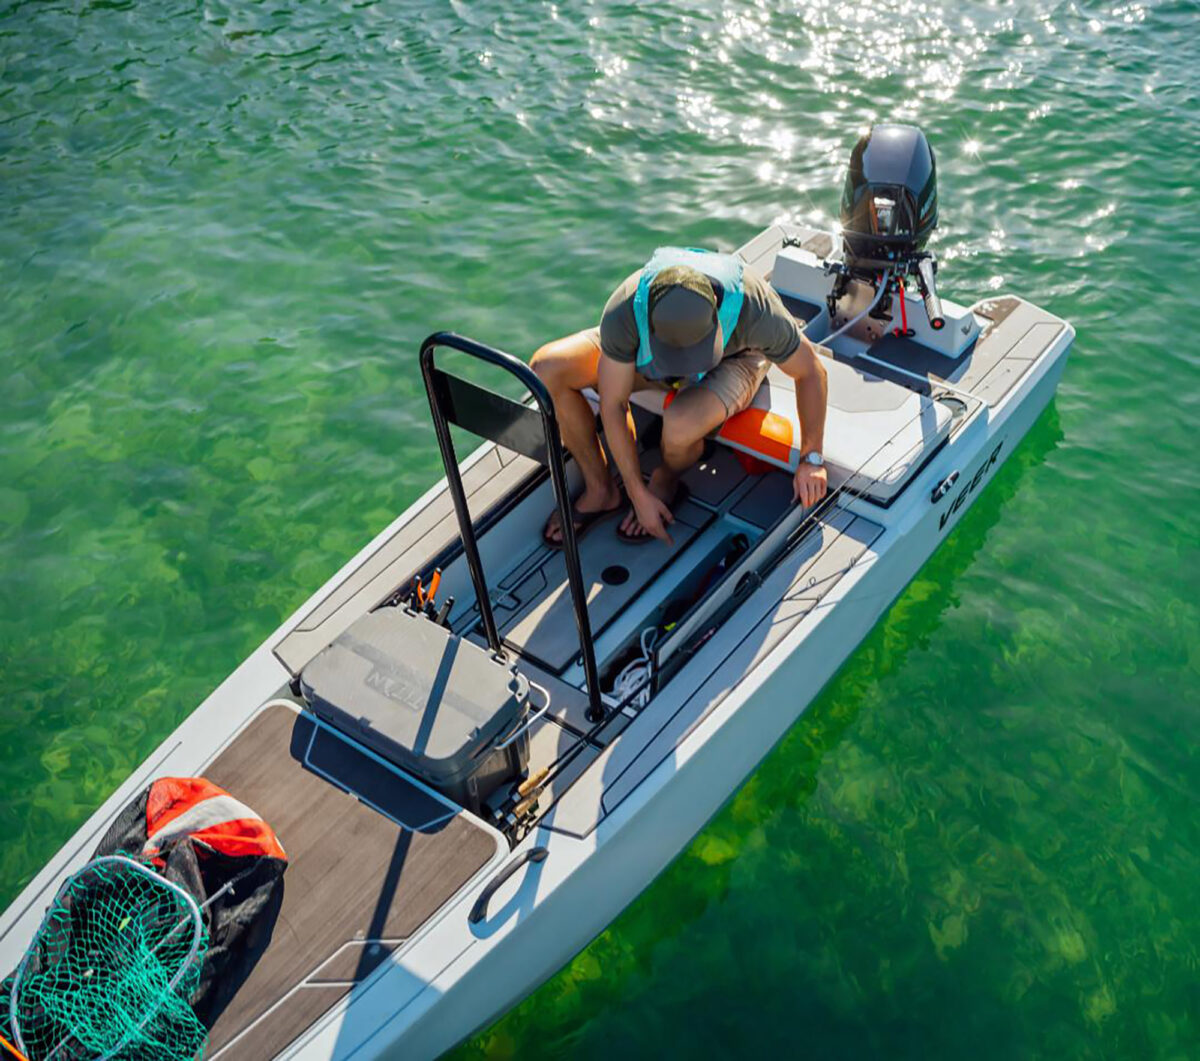 Brunswick’s 13-foot Veer boat supports electric propulsion.